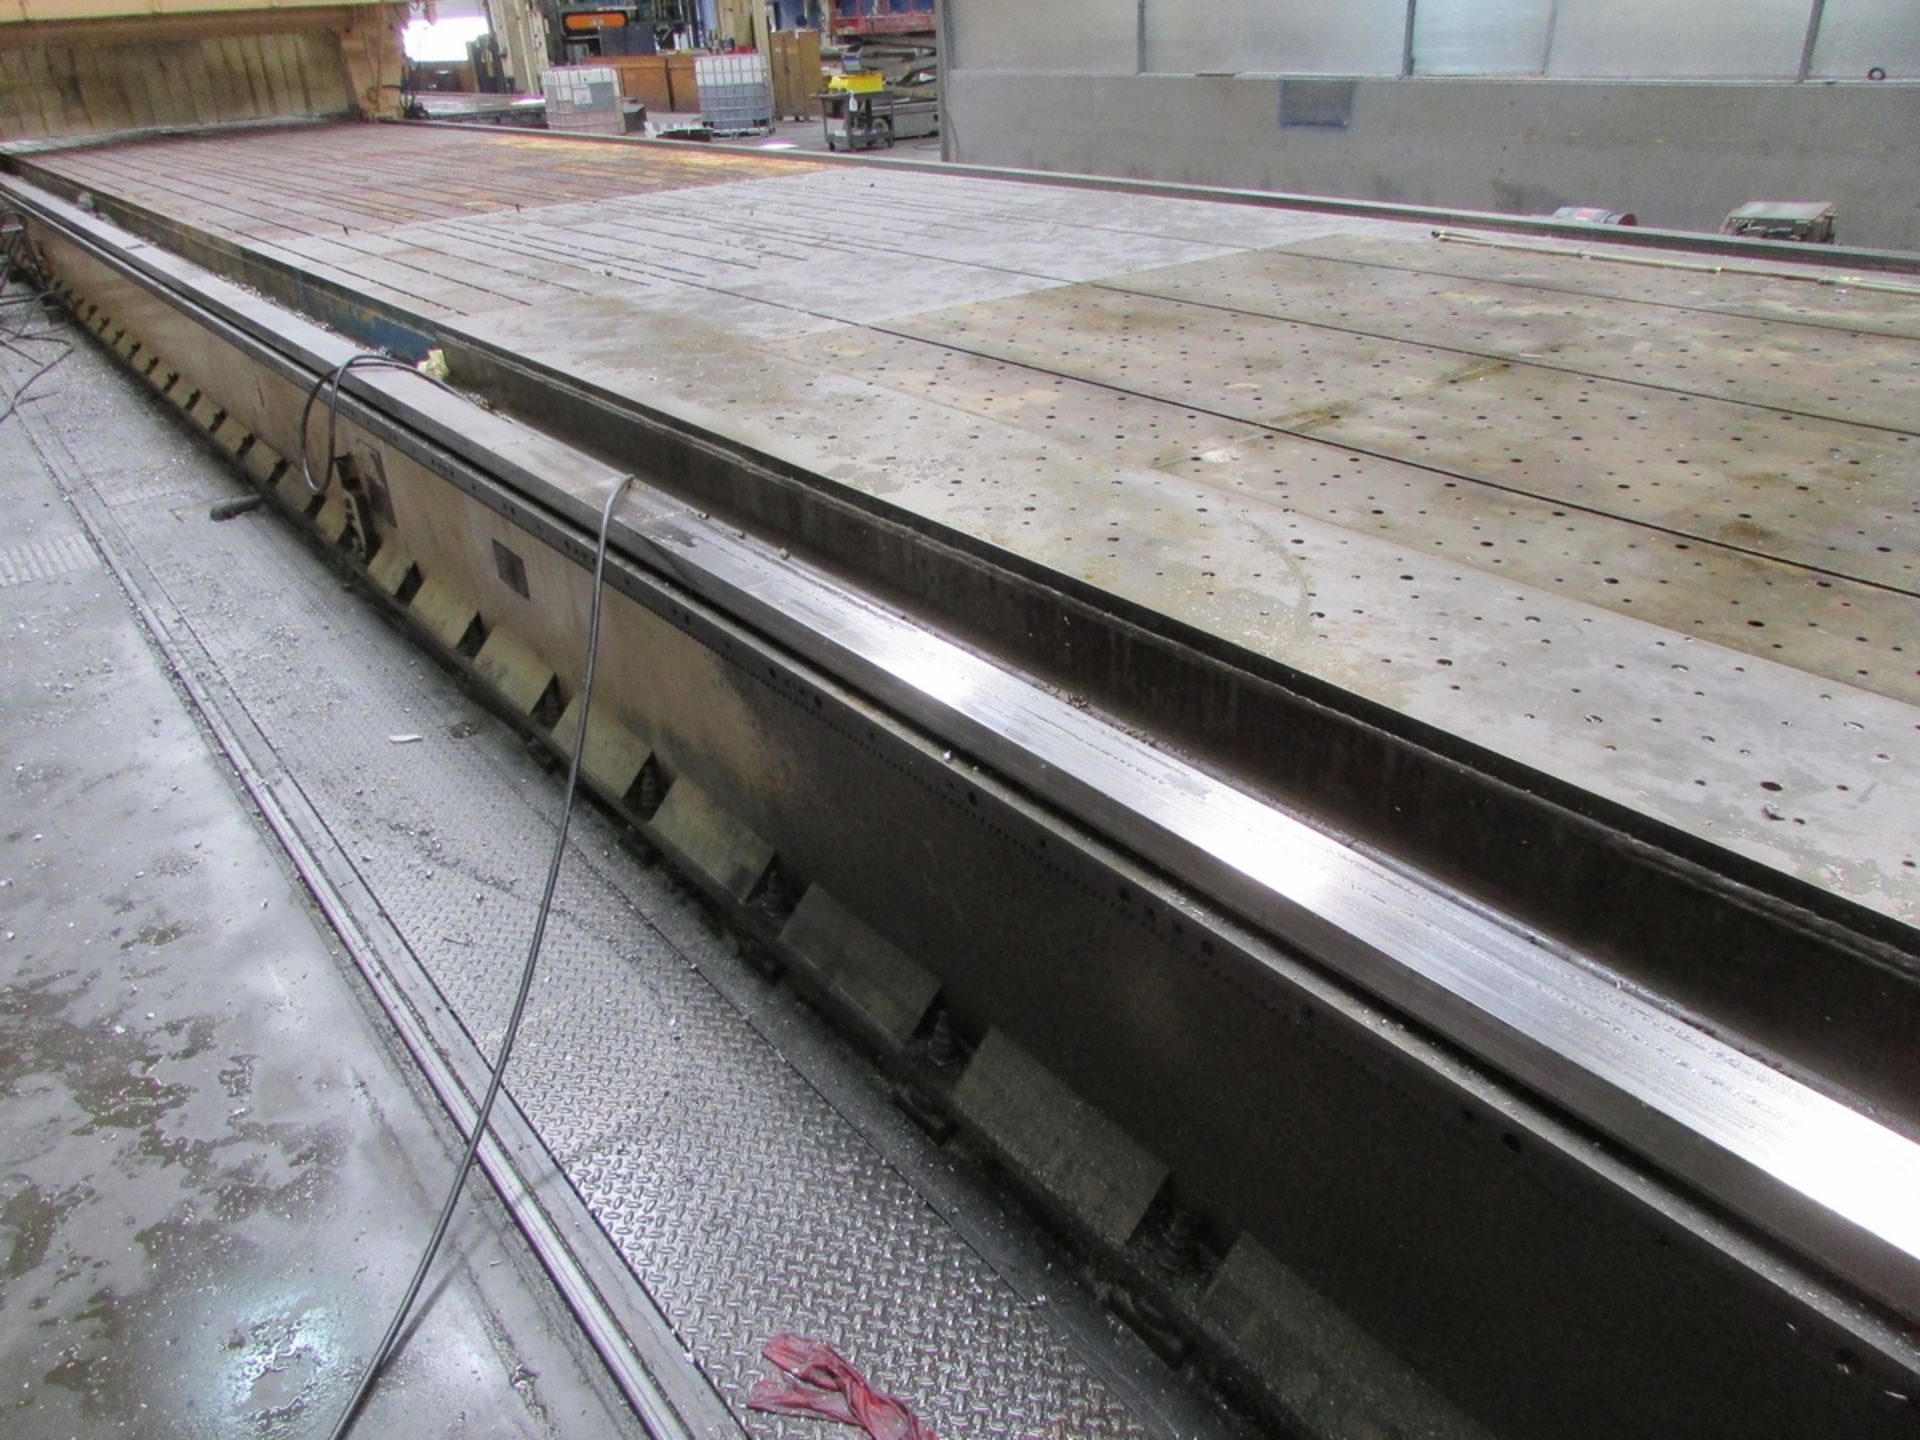 T-SLOTTED GANTRY MILL TABLE, 120' X 160", 125' BEDWAY LENGTH - Image 12 of 18